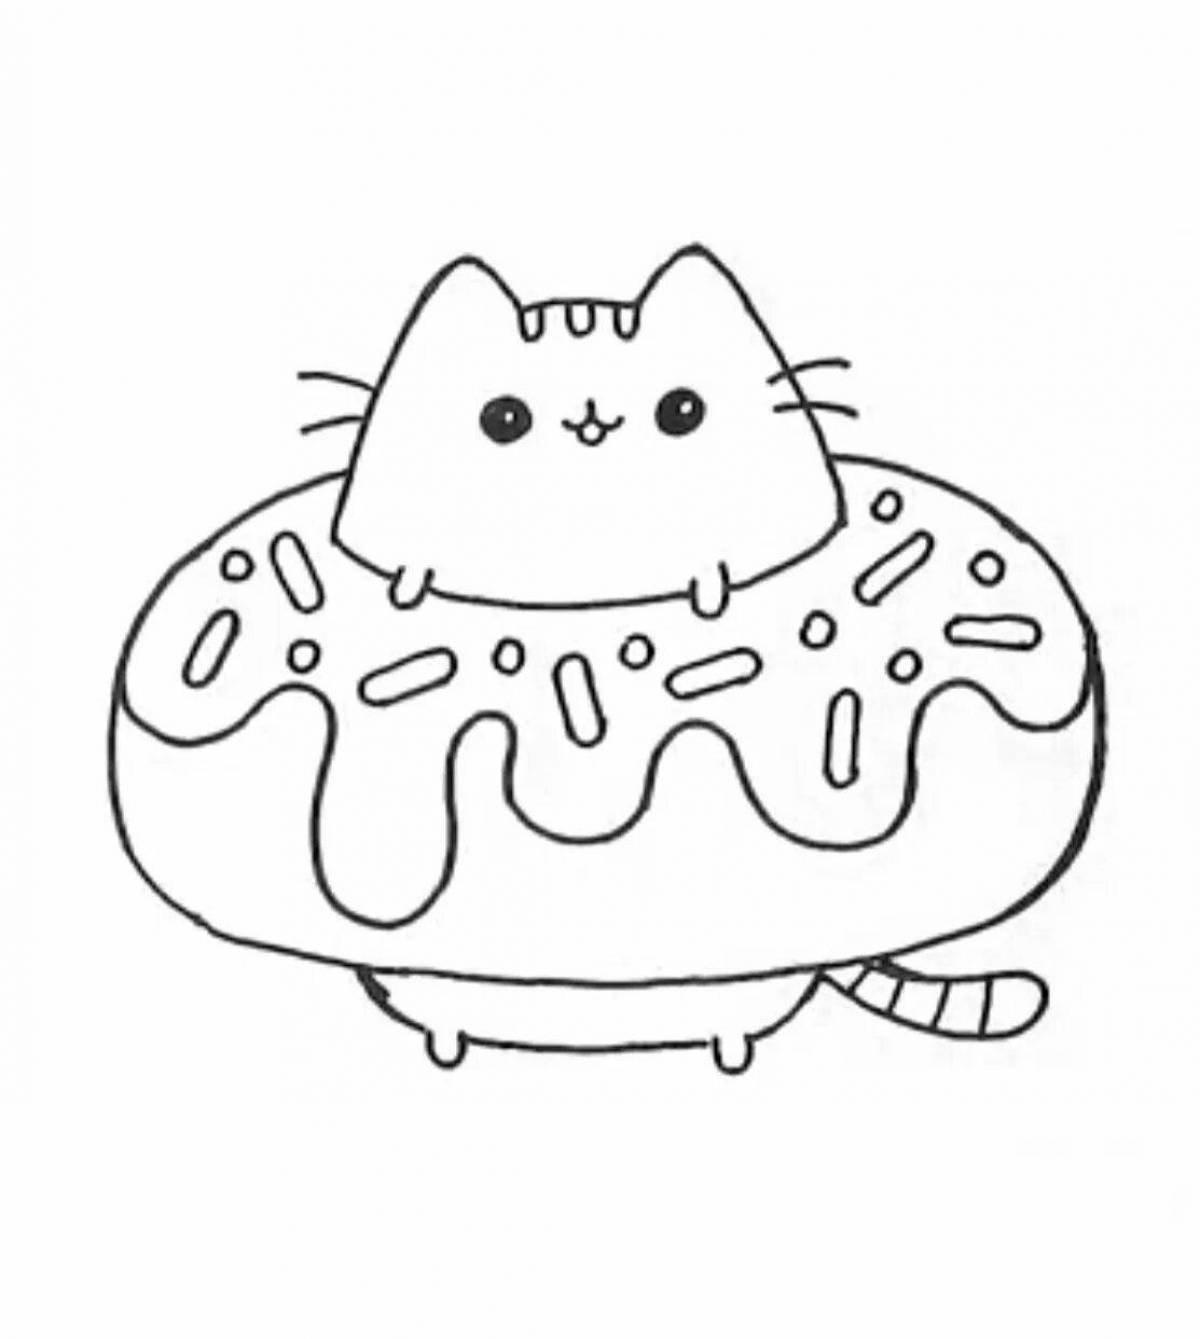 Adorable sushi cat coloring page